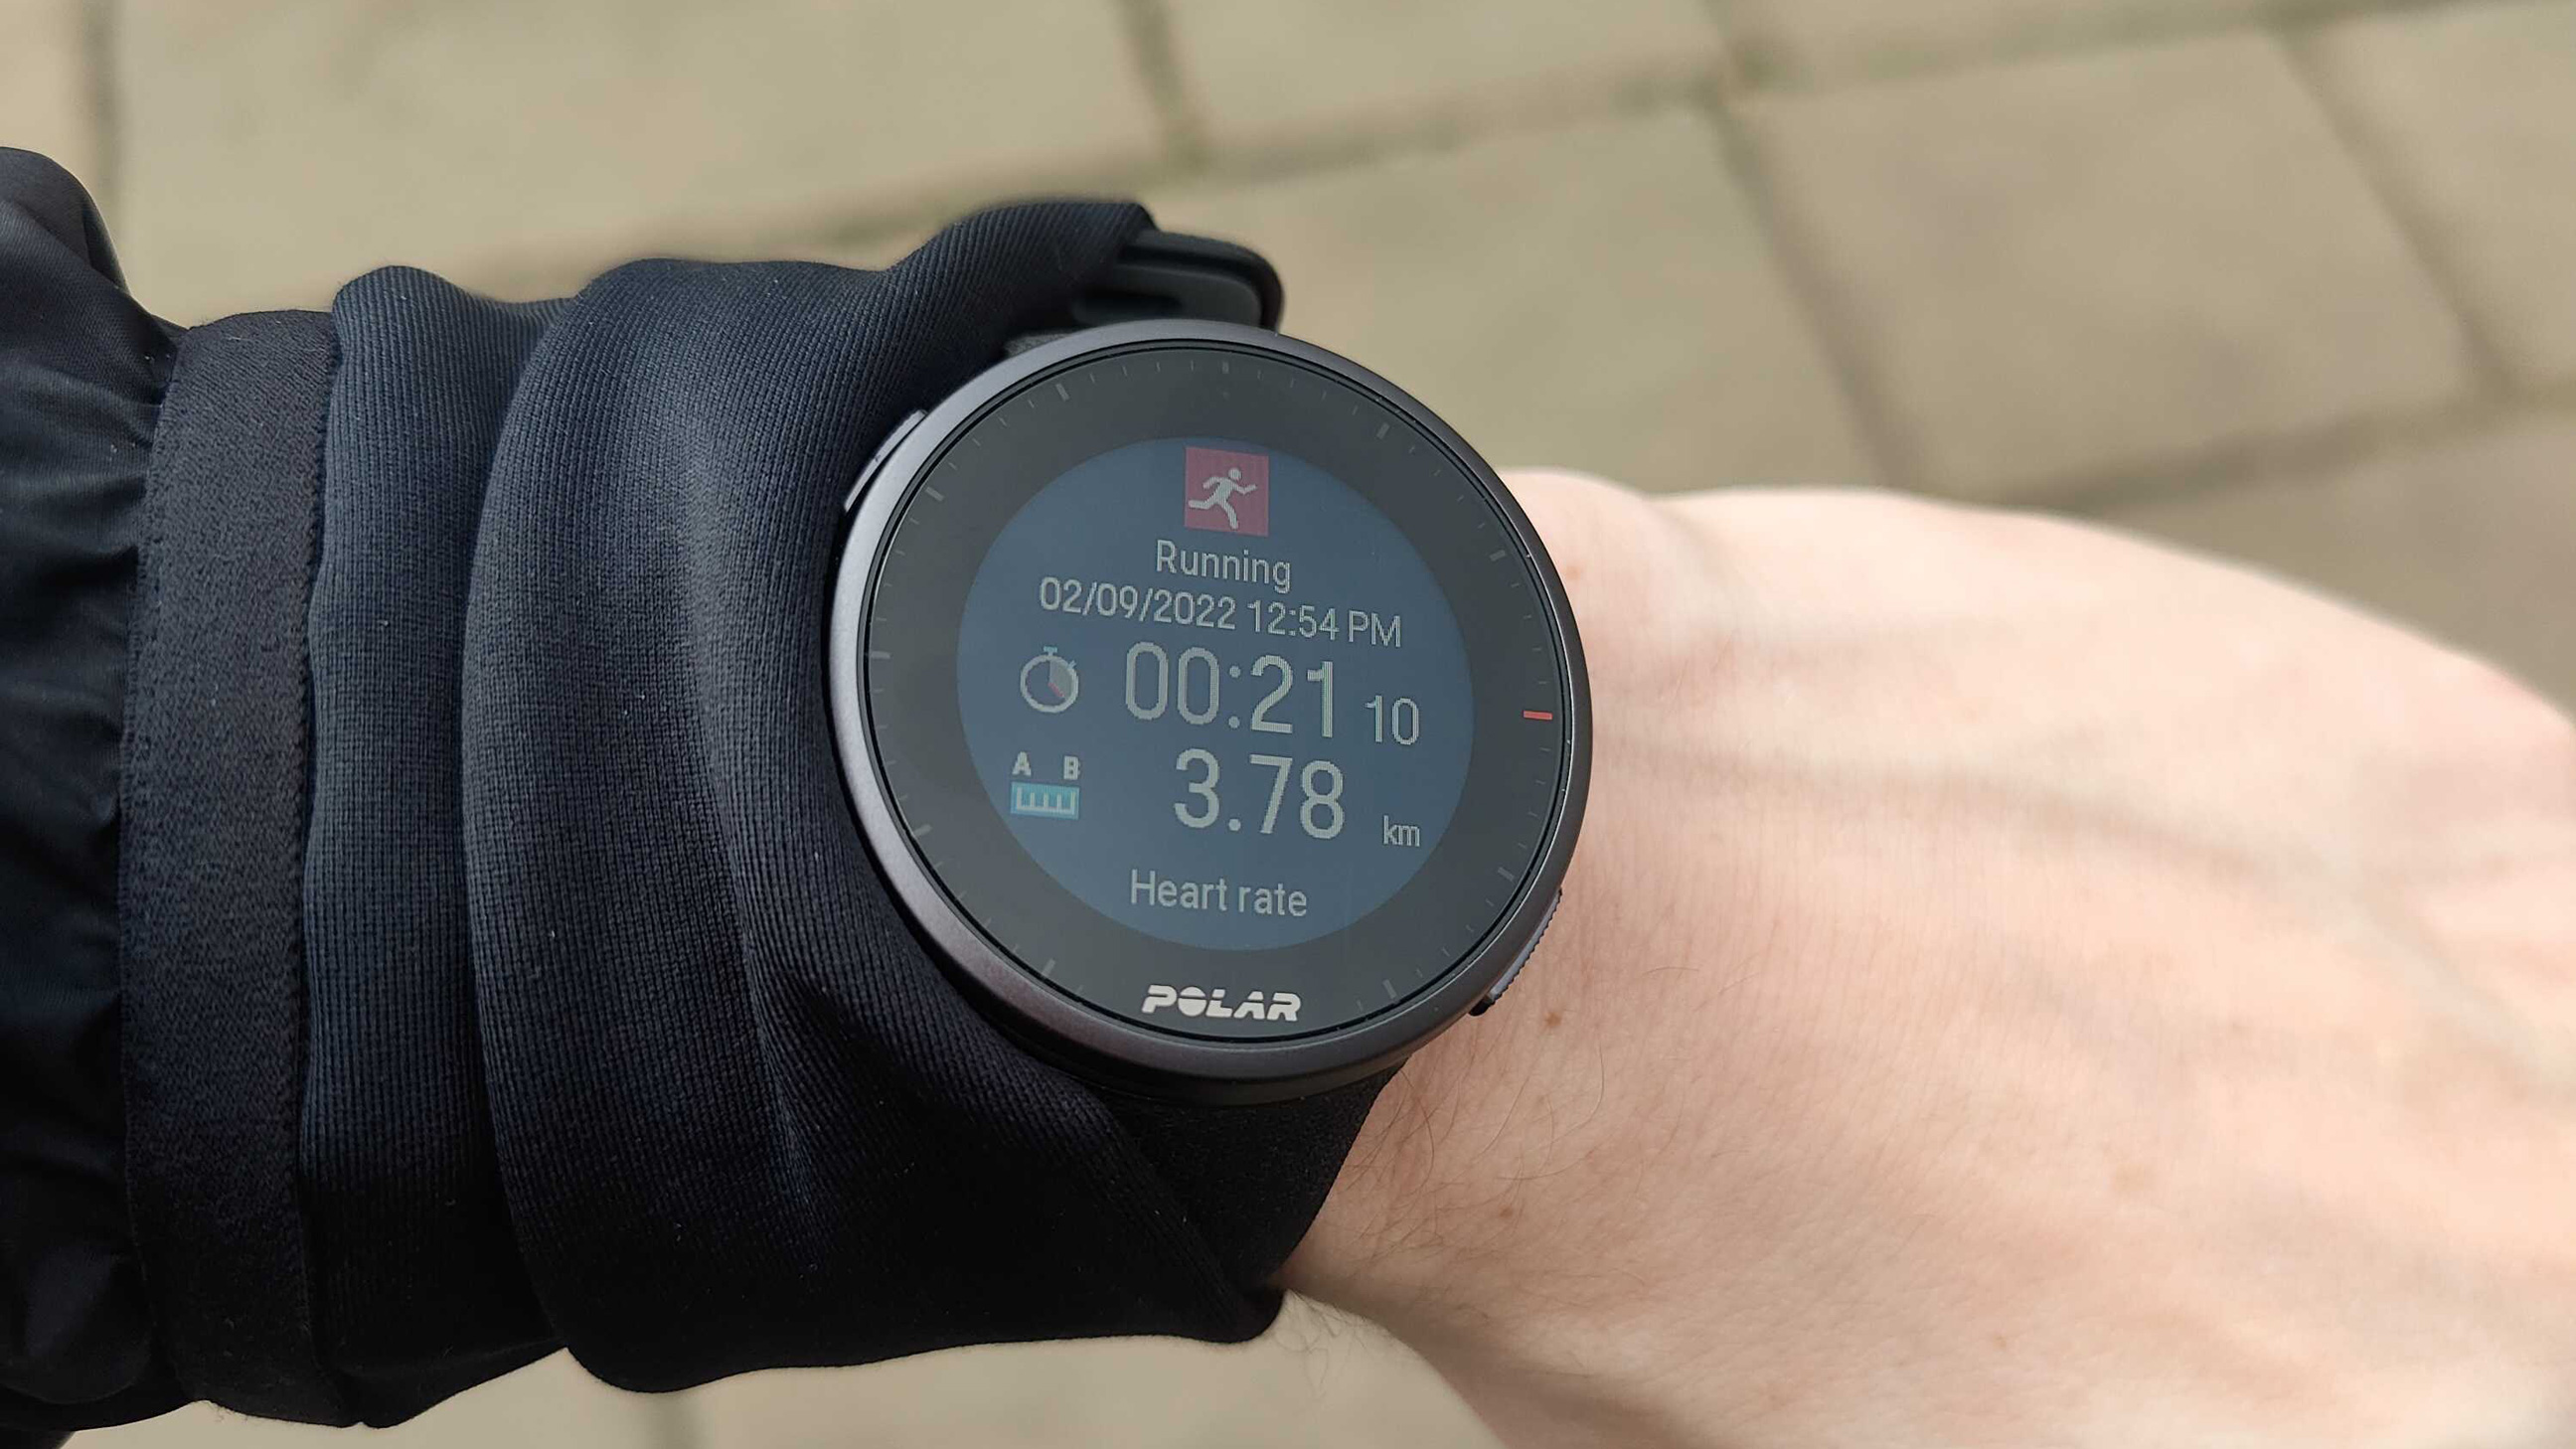 Lighter Polar Vantage V2 smartwatch updated with many new bike-specific  tracking & training features - Bikerumor